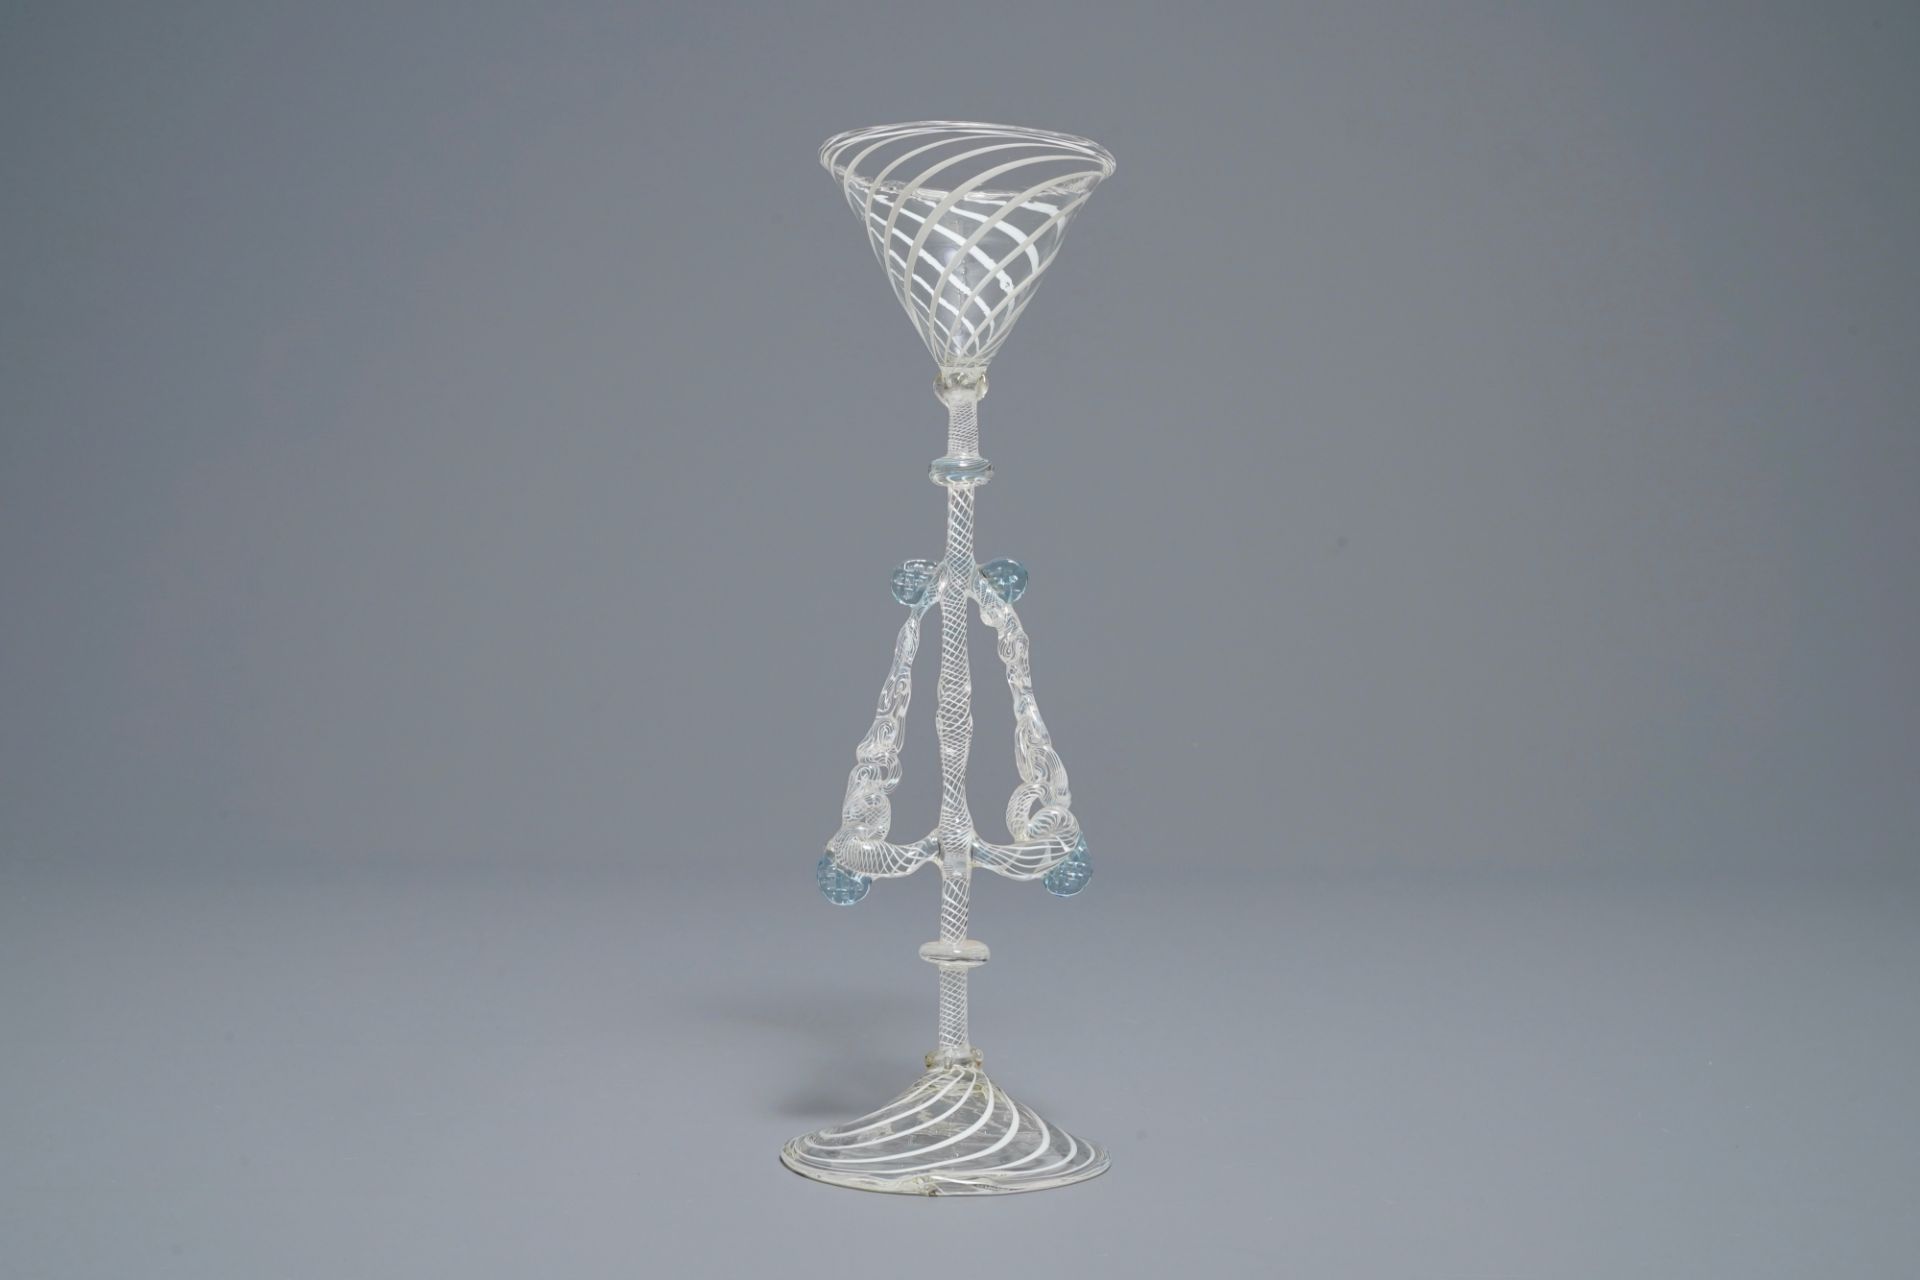 A façon de Venise winged wine glass, Italy or Holland, 18/19th C. - Image 3 of 6